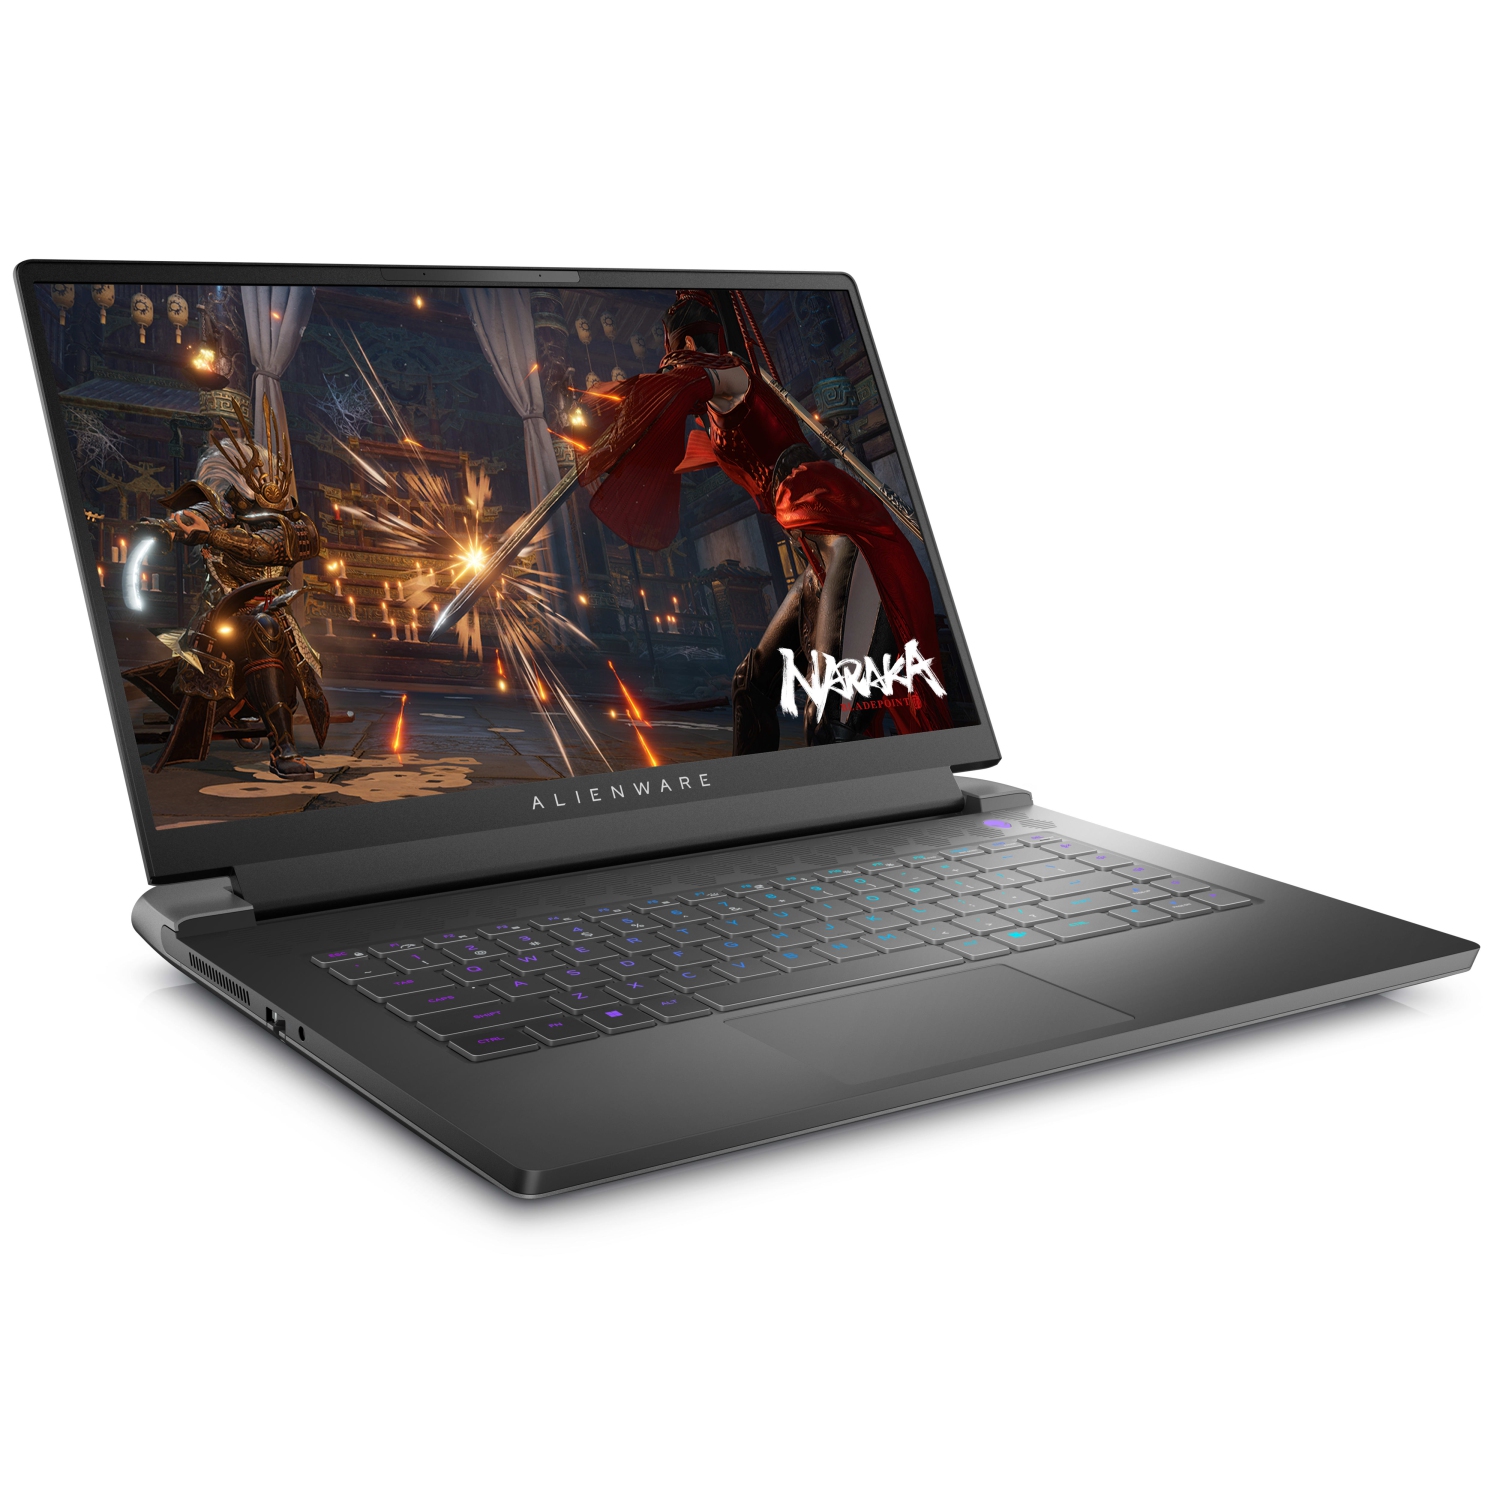 Refurbished (Excellent) – Dell Alienware m15 R7 Gaming Laptop (2022) | 15.6" FHD | Core i9 - 4TB SSD - 64GB RAM - RTX 3080 | 14 Cores @ 5 GHz - 12th Gen CPU - 10GB GDDR6X